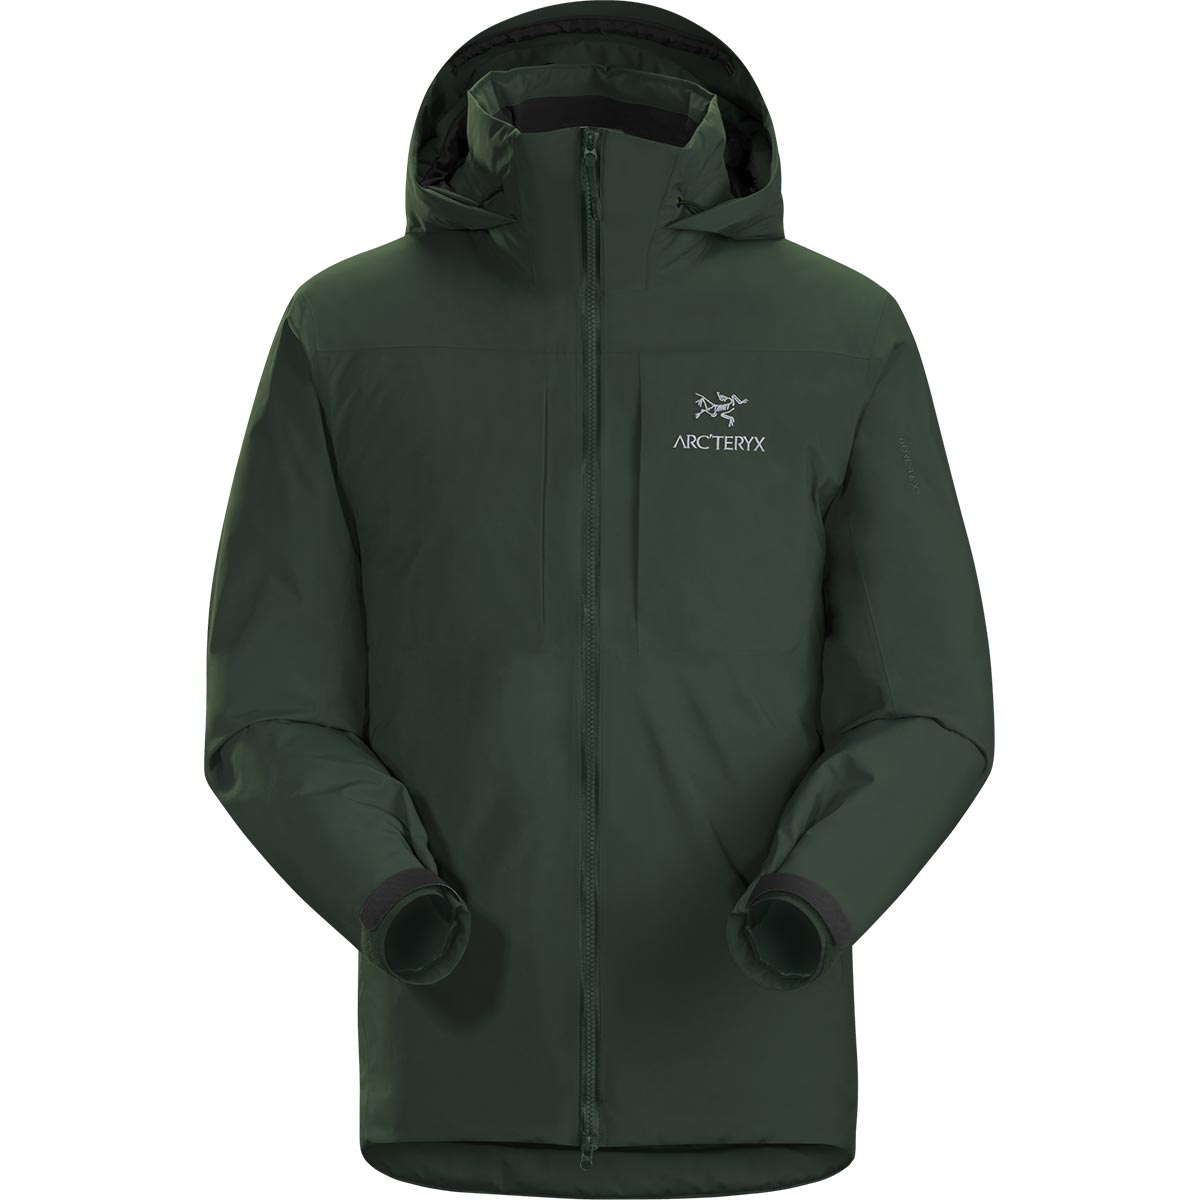 Arc'teryx Fission SV Jacket, men's, discontinued Fall 2018 colors (free ...